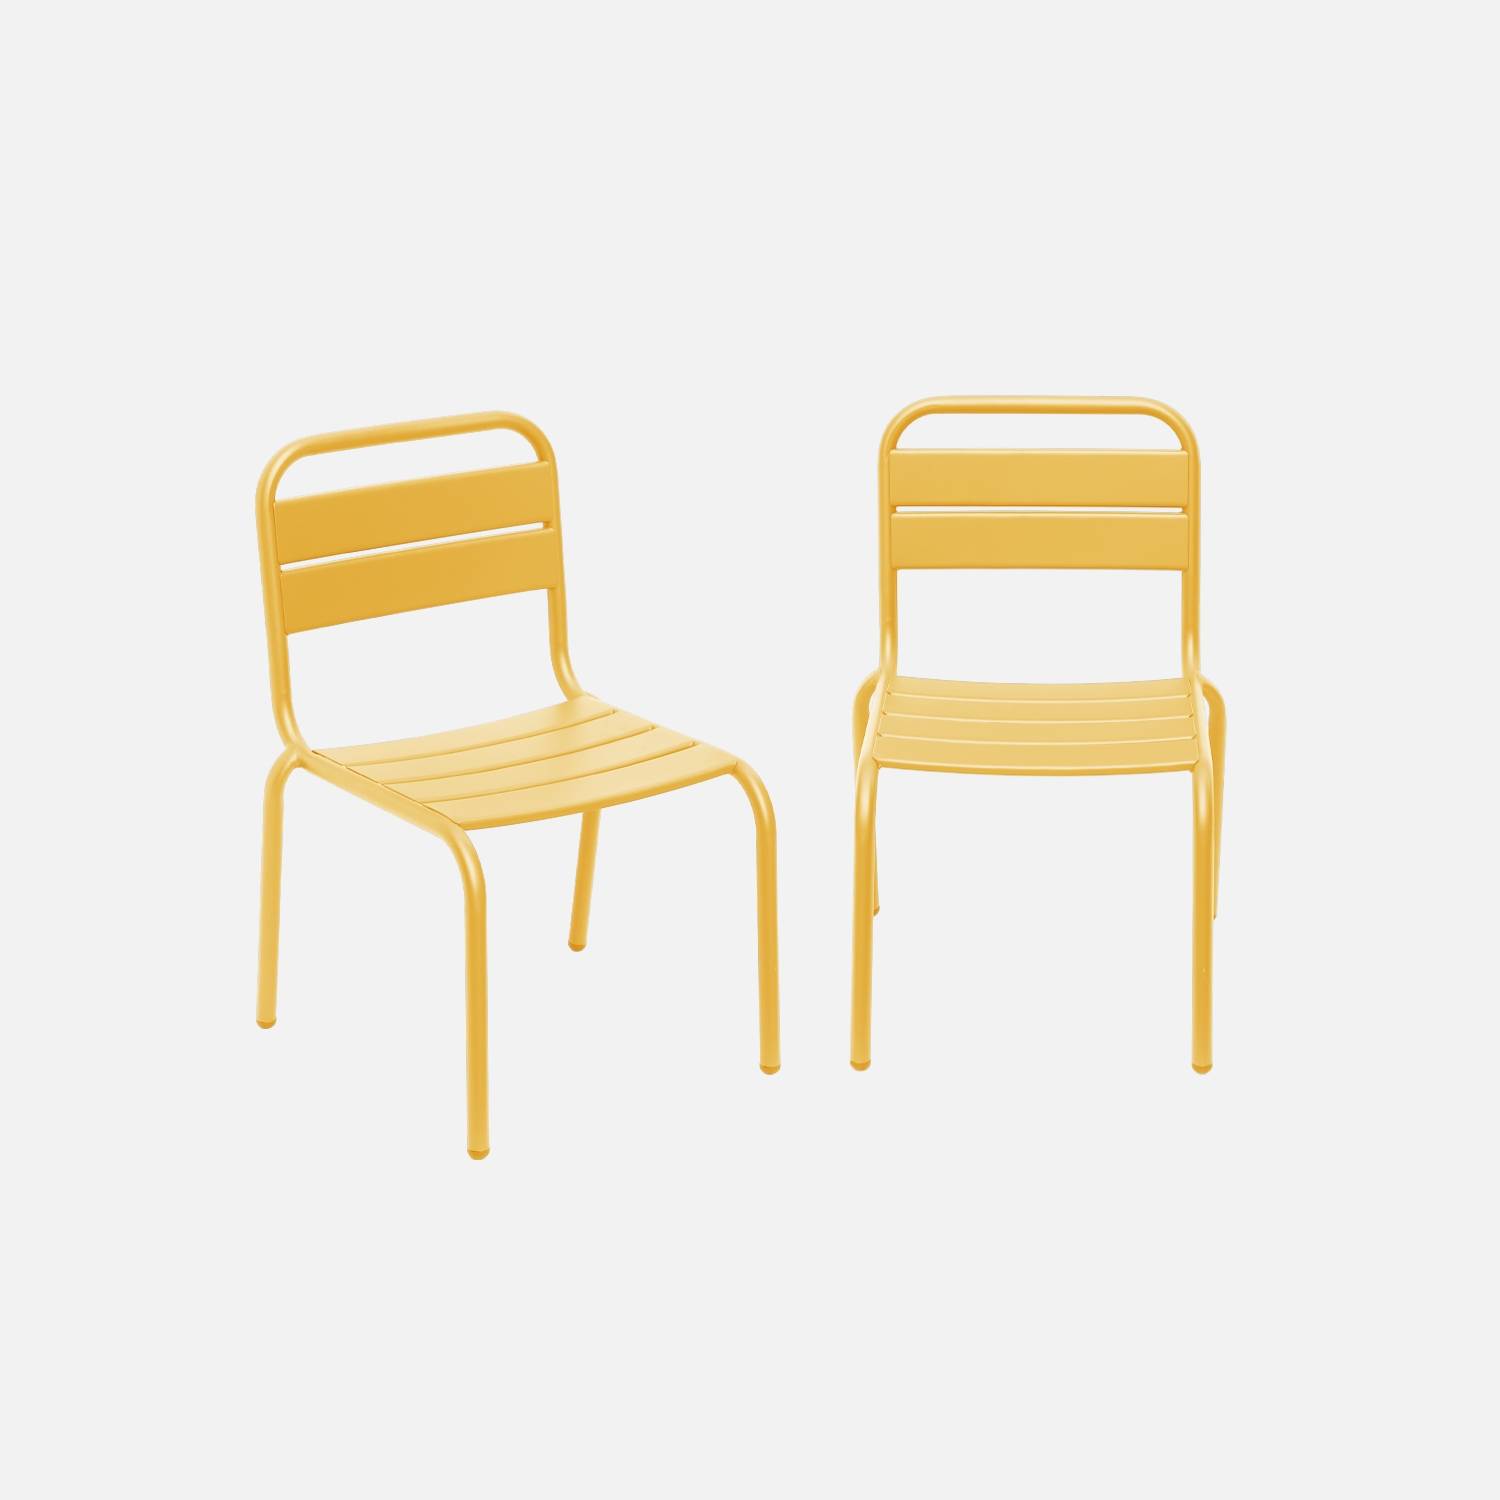 Set of 2 metal chairs for children, Yellow